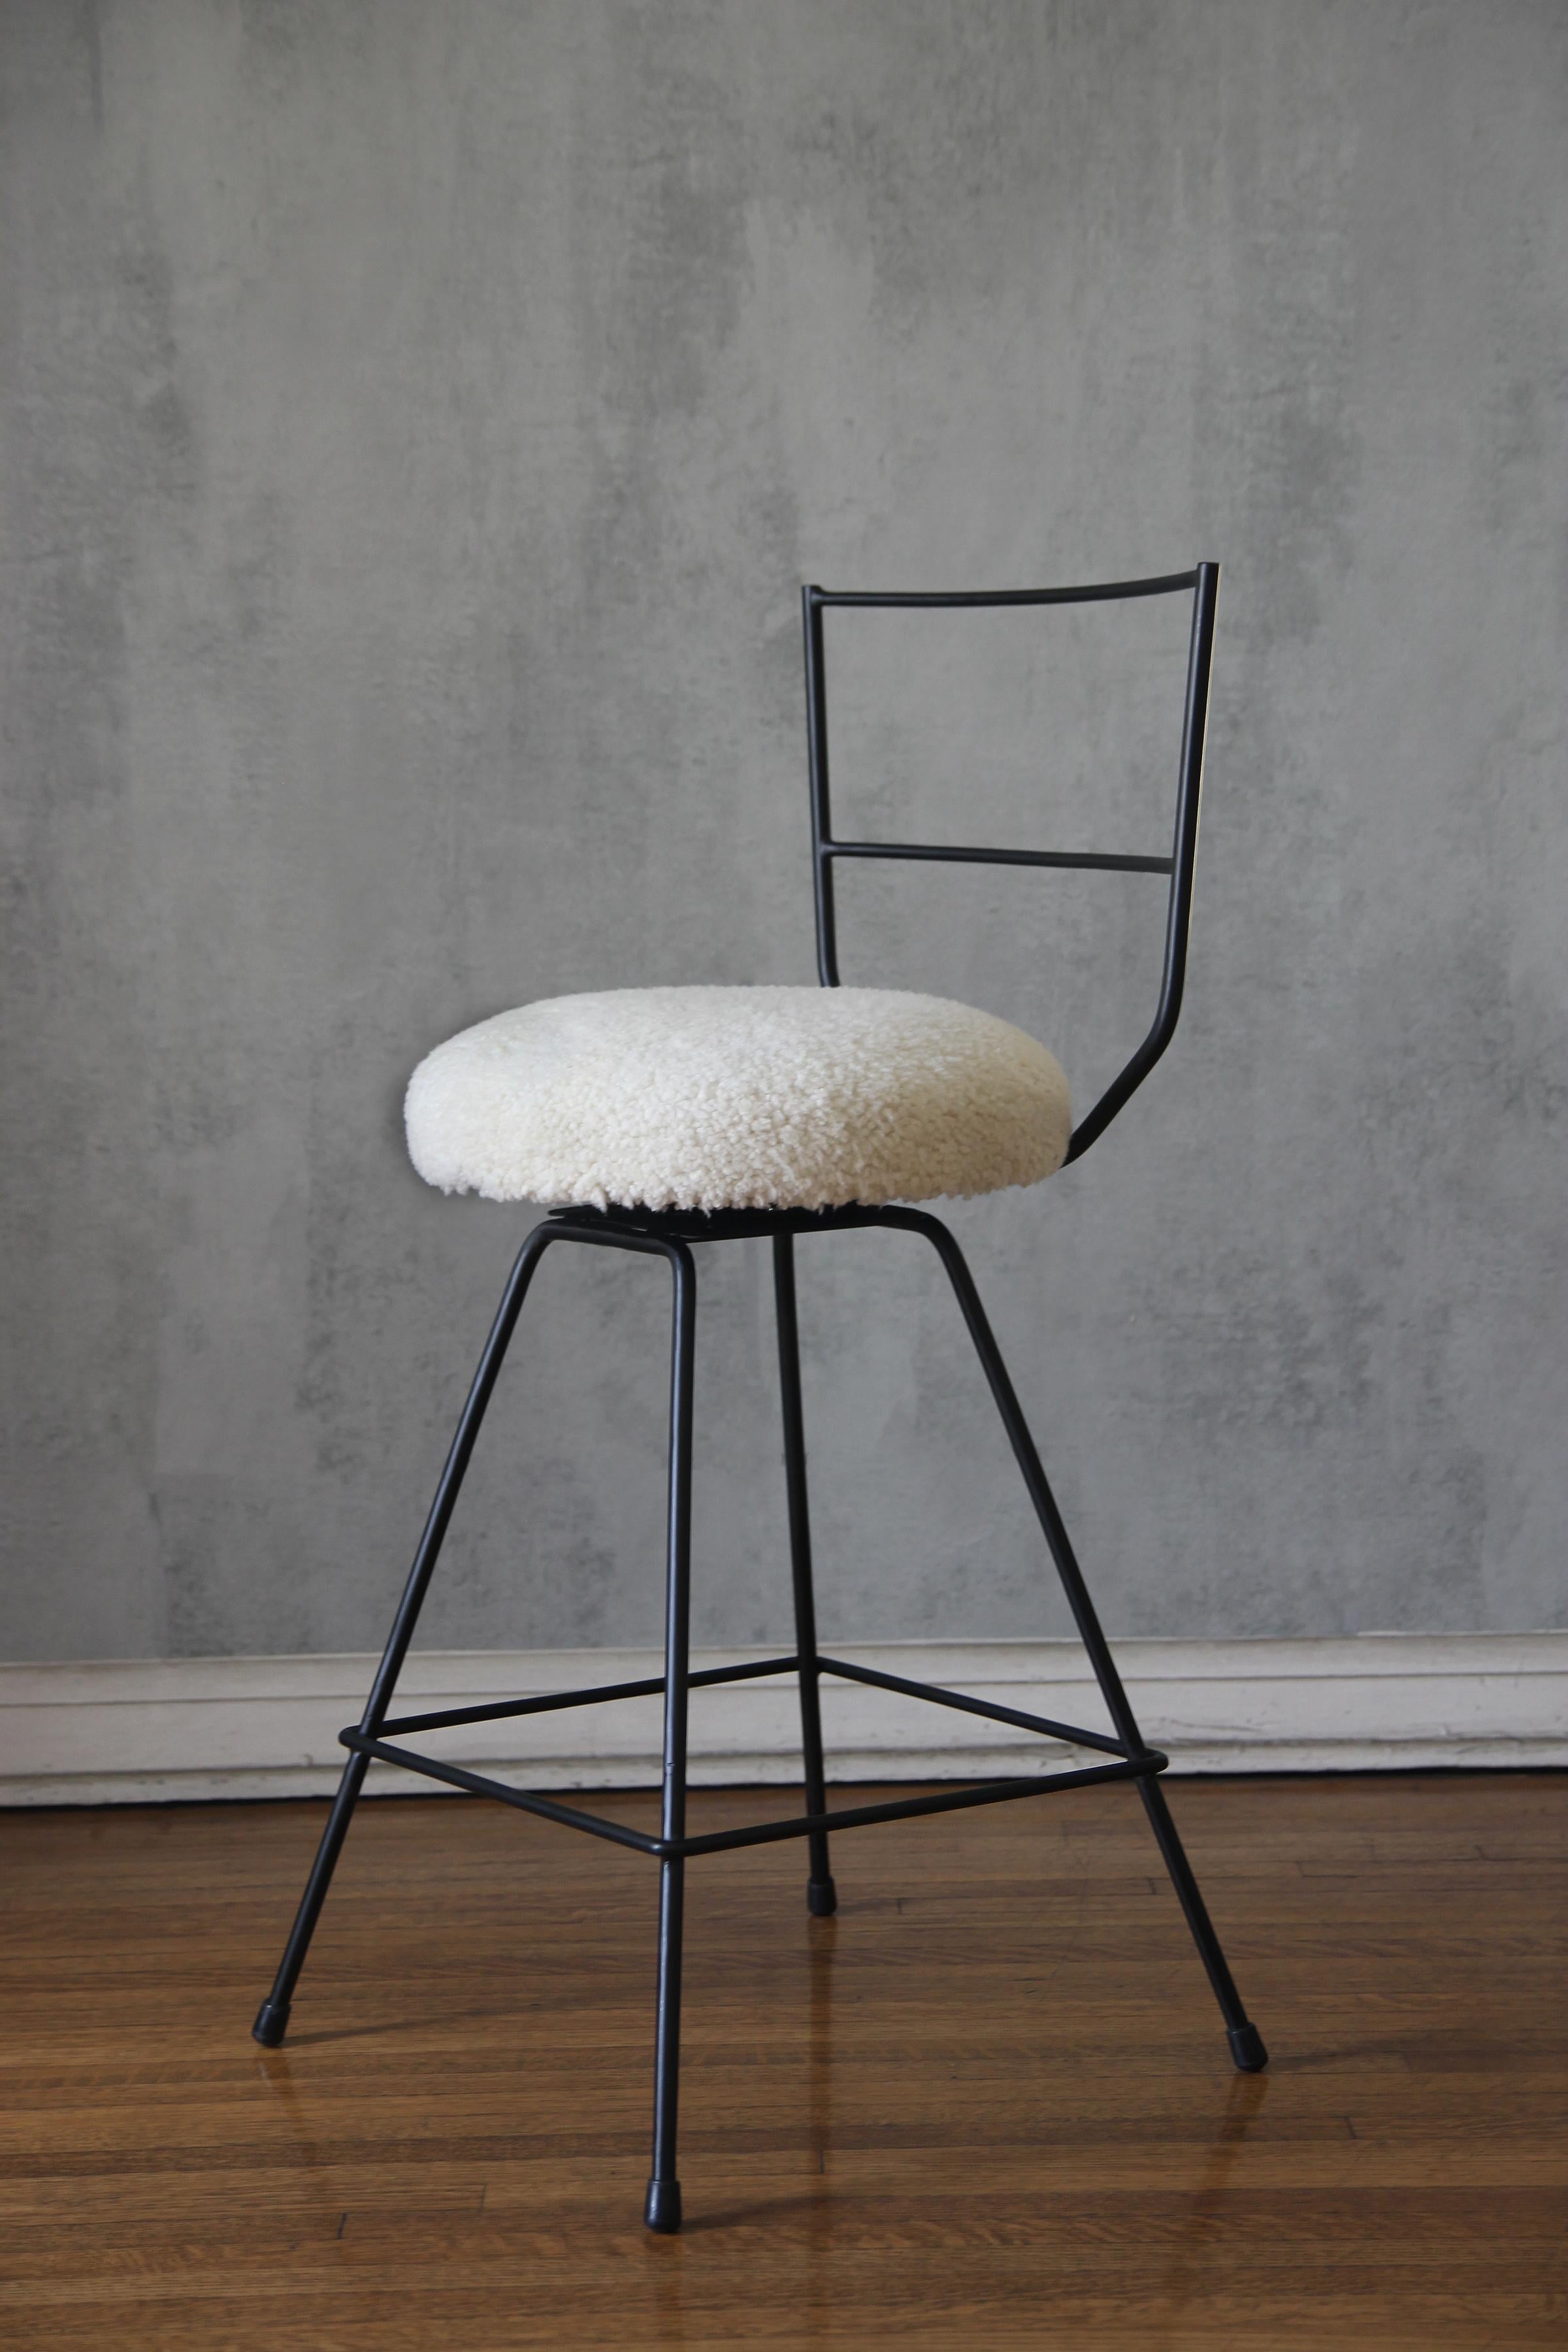 Chic combination of slender but sturdy powder coated steel frames contrast nicely with the natural cream shearling upholstery.

This unique upholstery treatment gives a luxurious feel.

The pair of stools is part of our new understated design